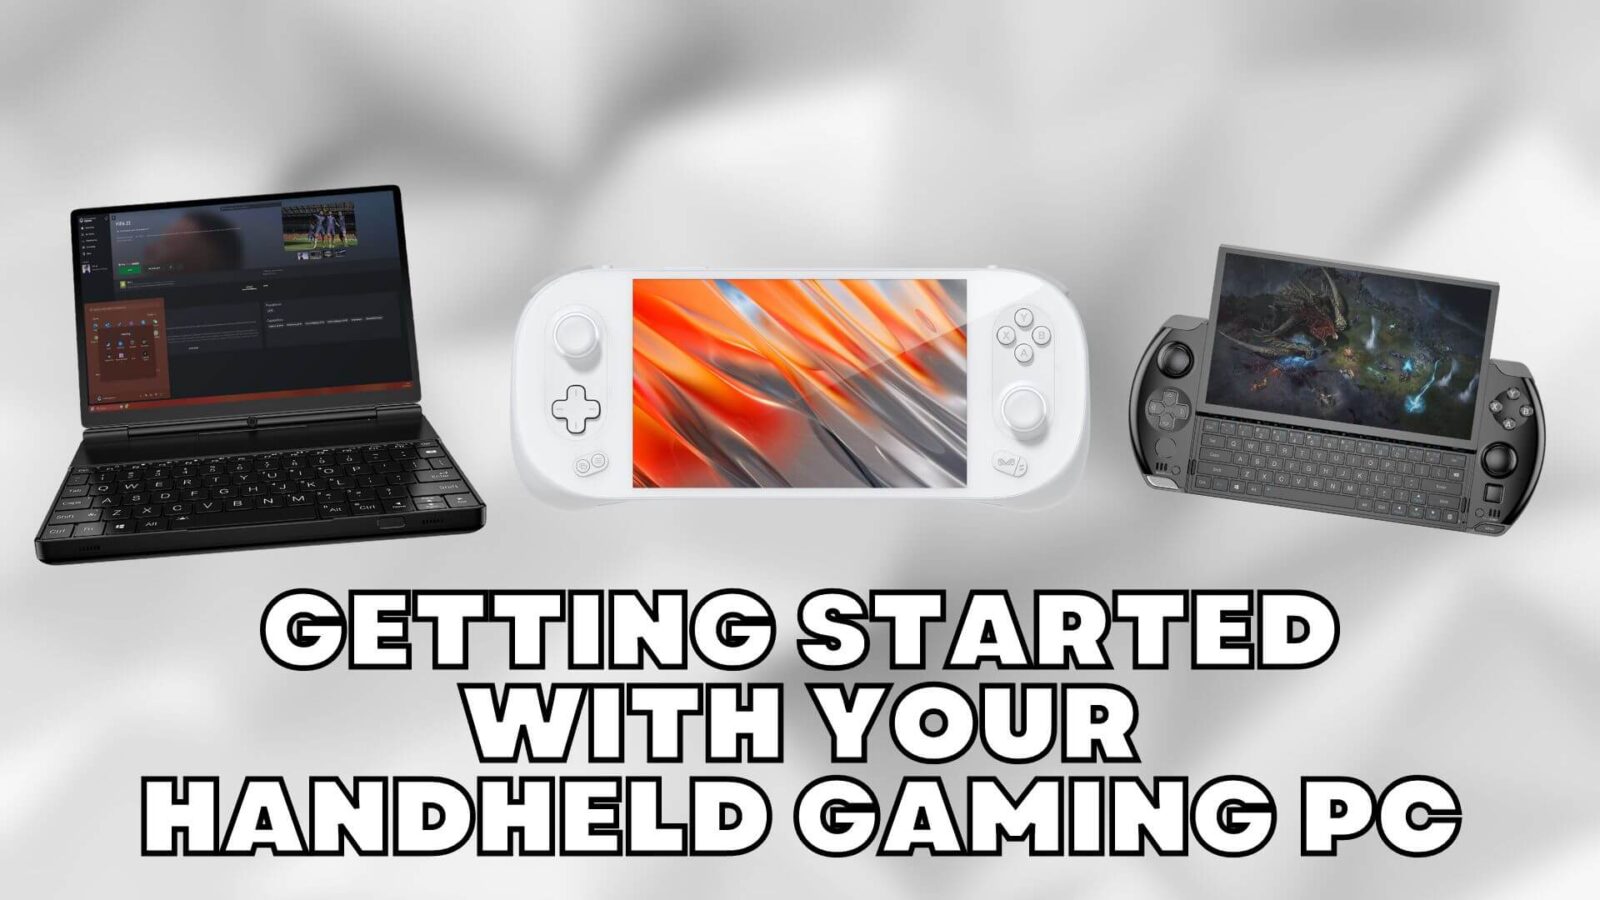 Roblox on a Handheld Console – The GPD Win – ROBLOX Building Guide